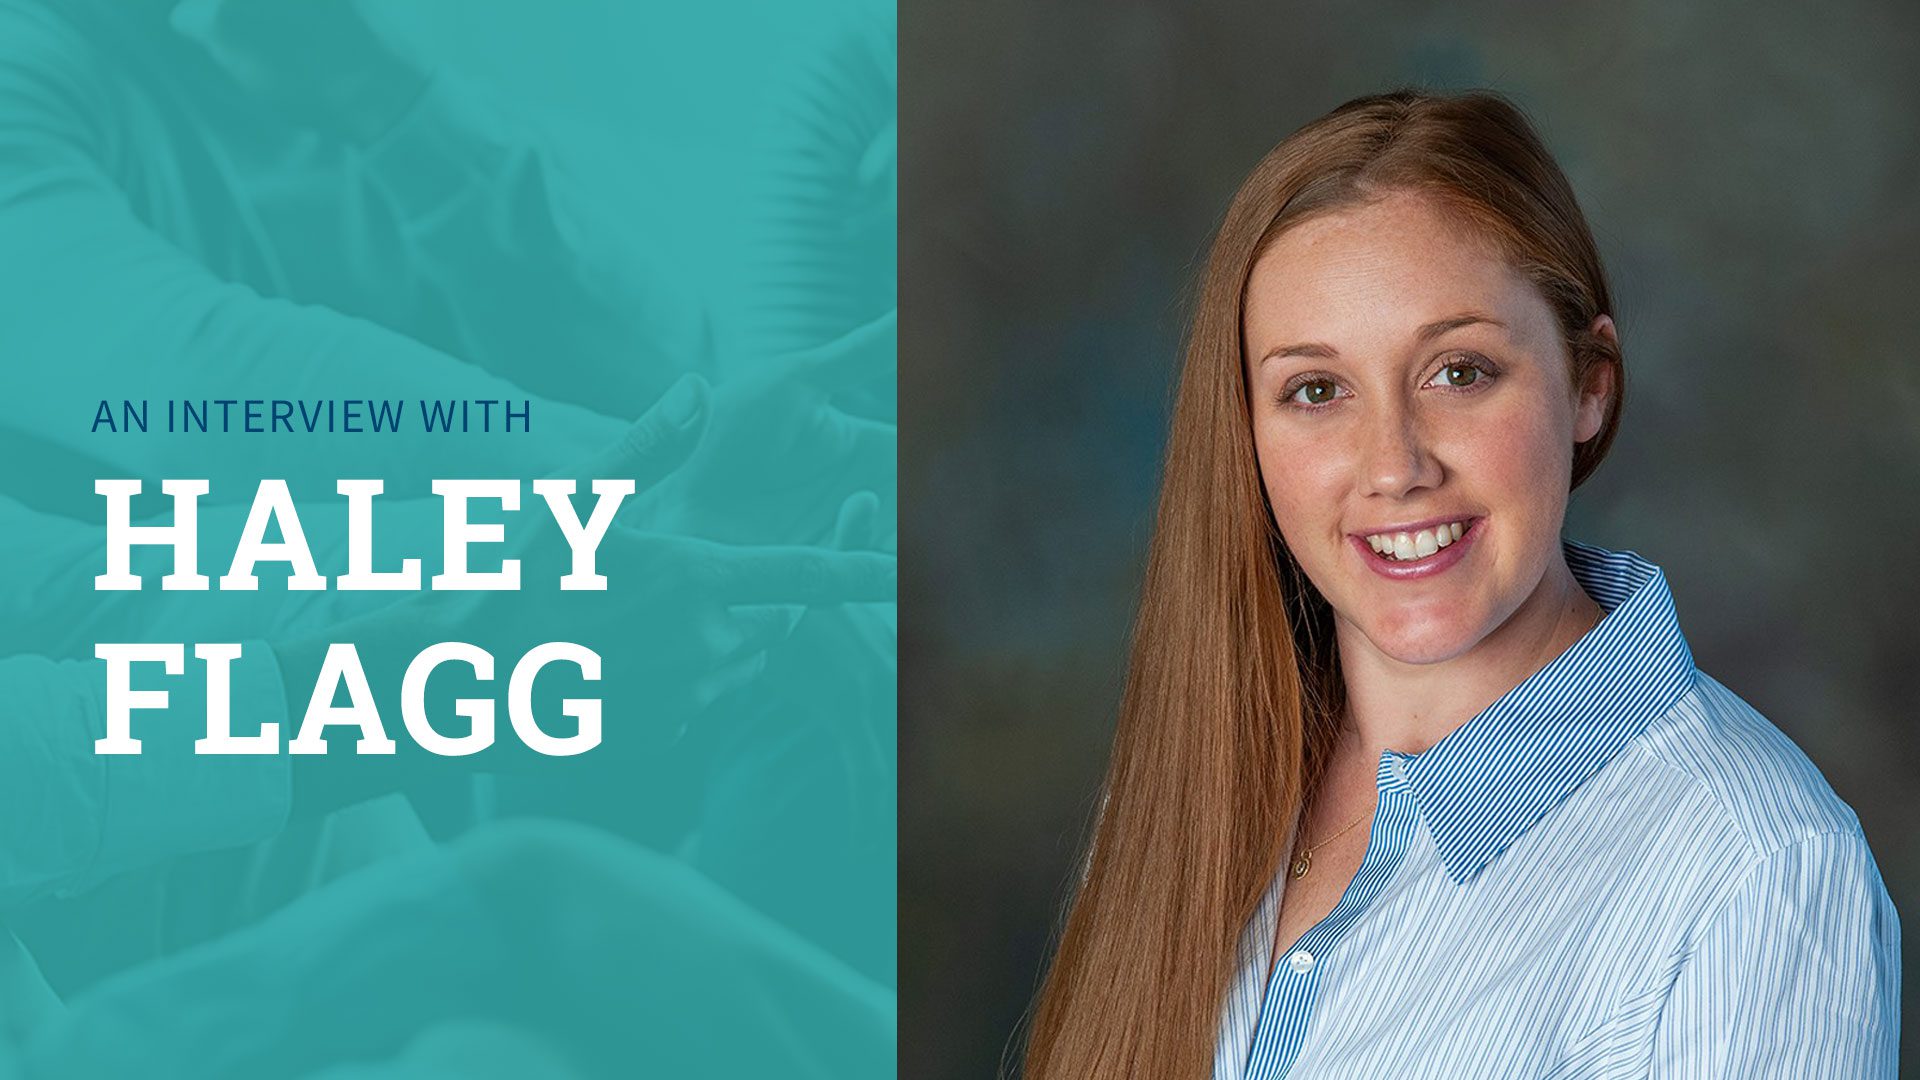 An Interview With Haley Flagg